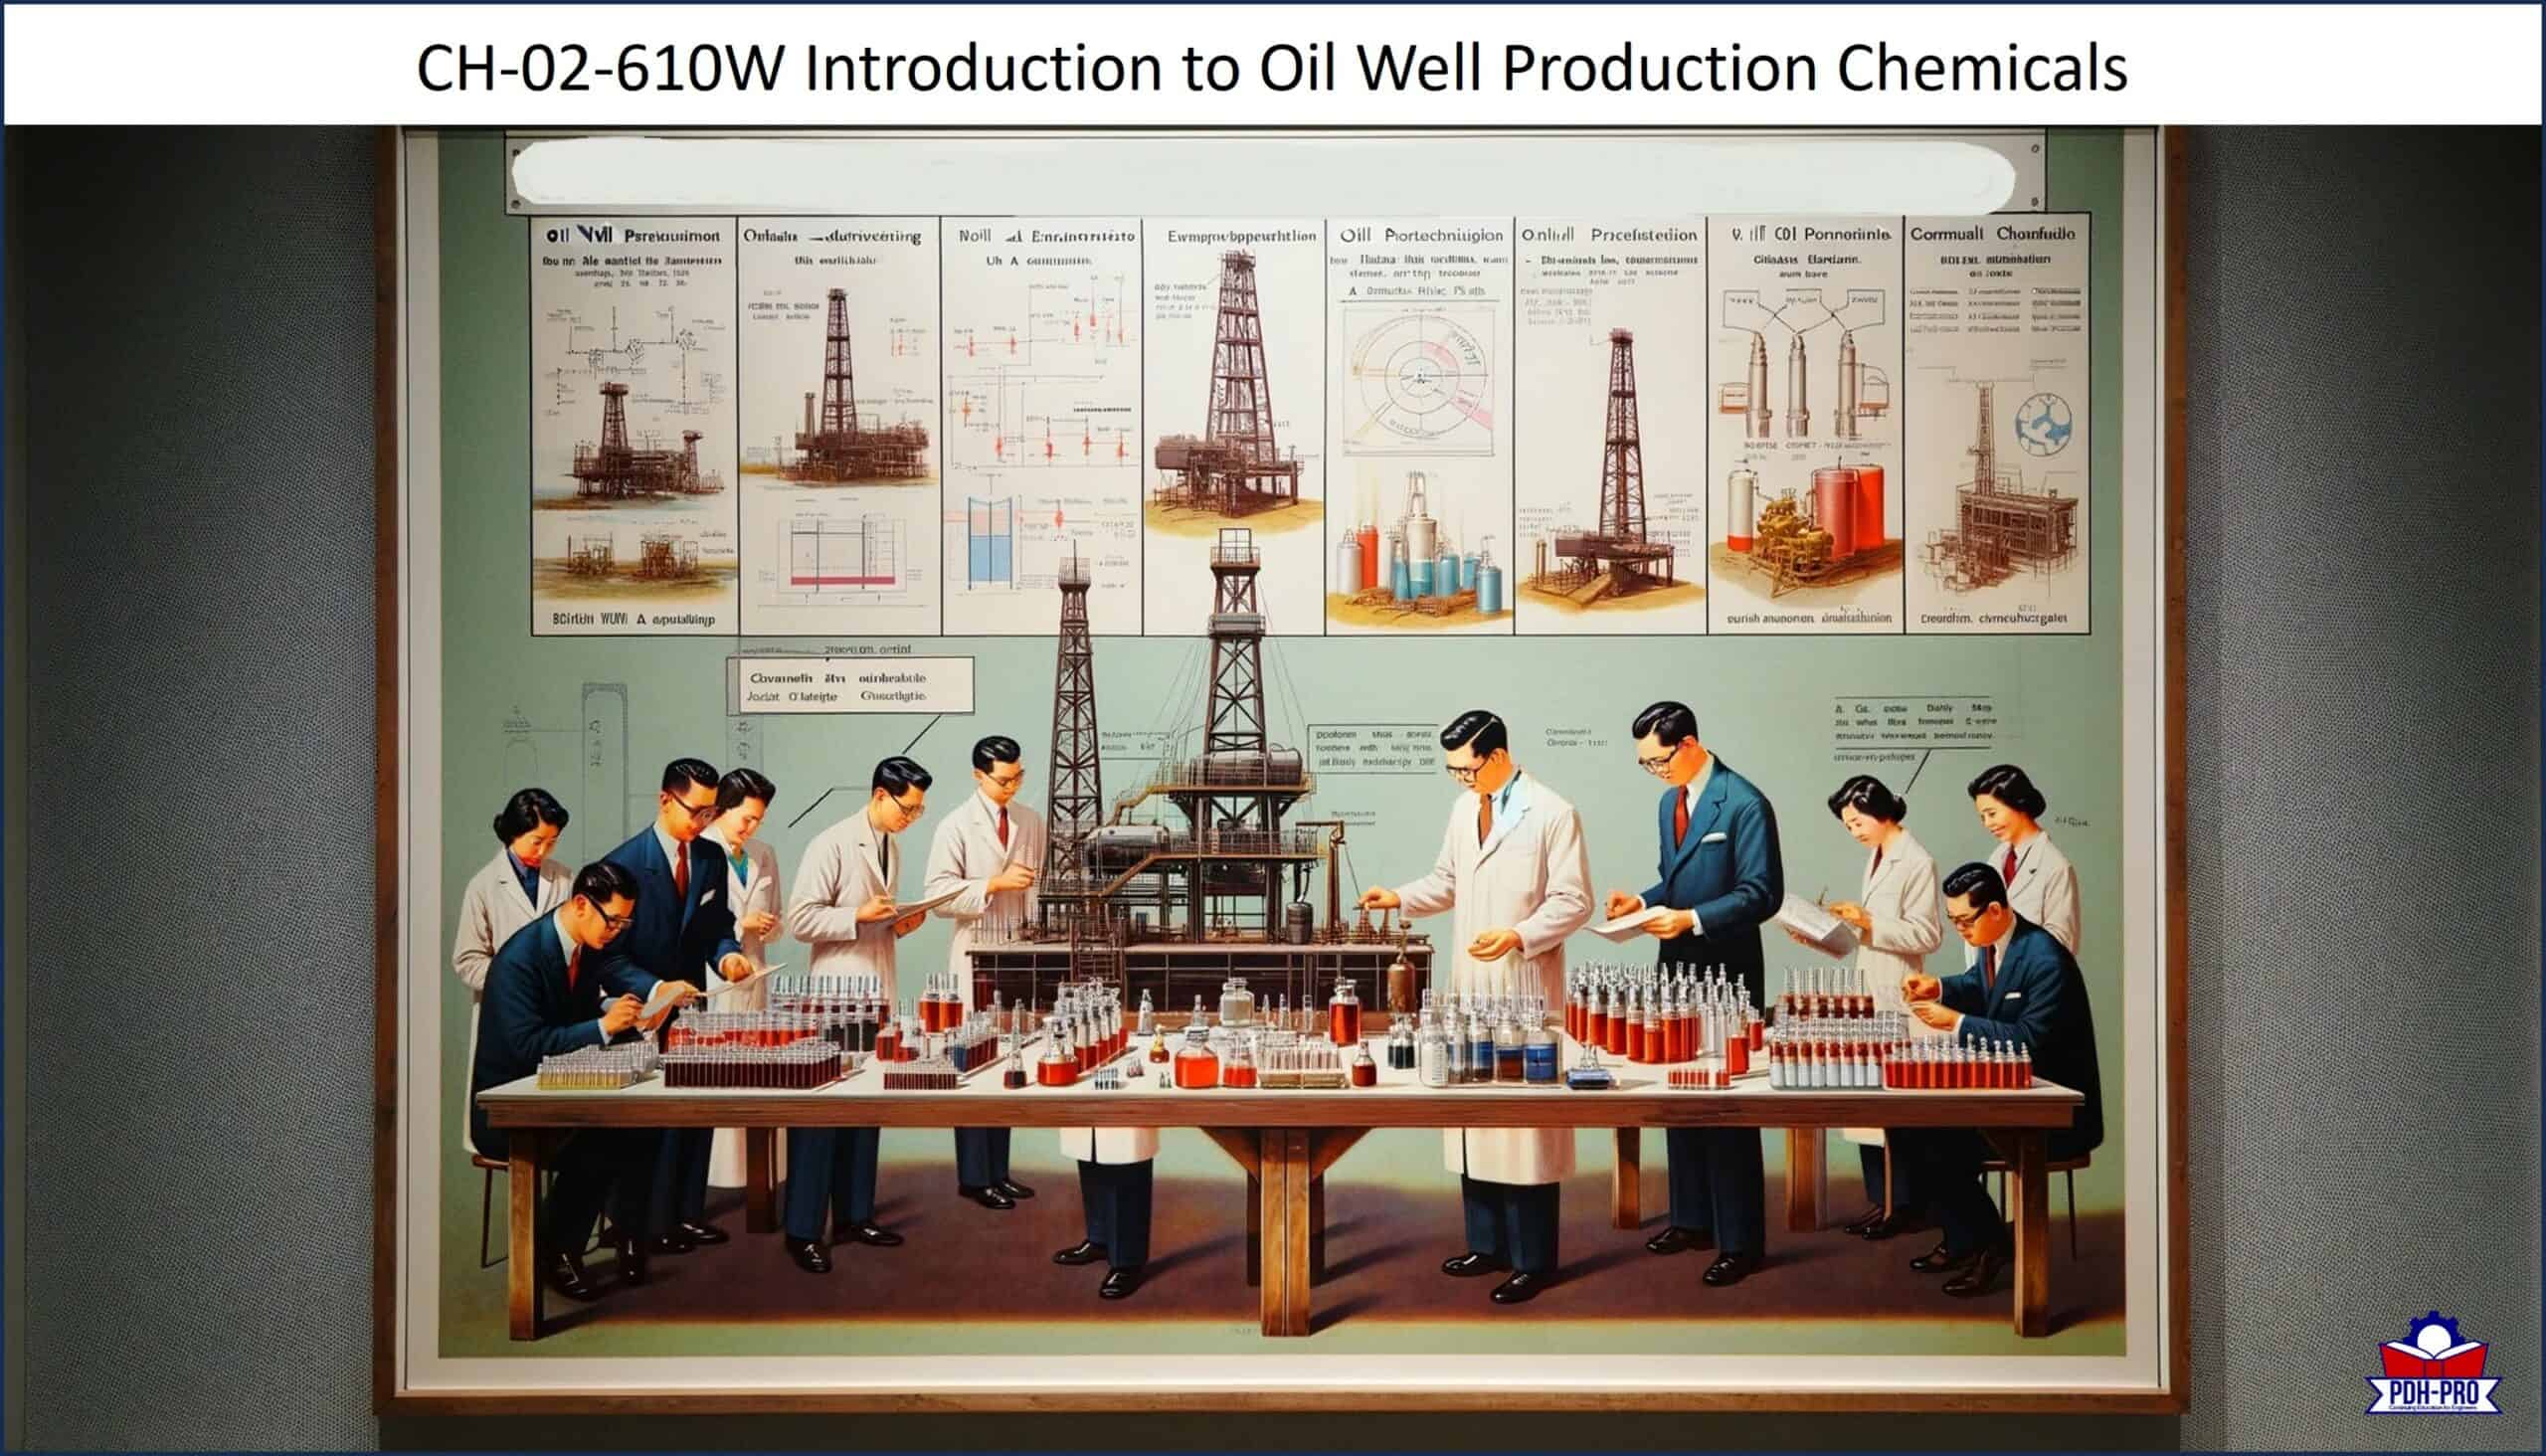 Introduction to Oil Well Production Chemicals